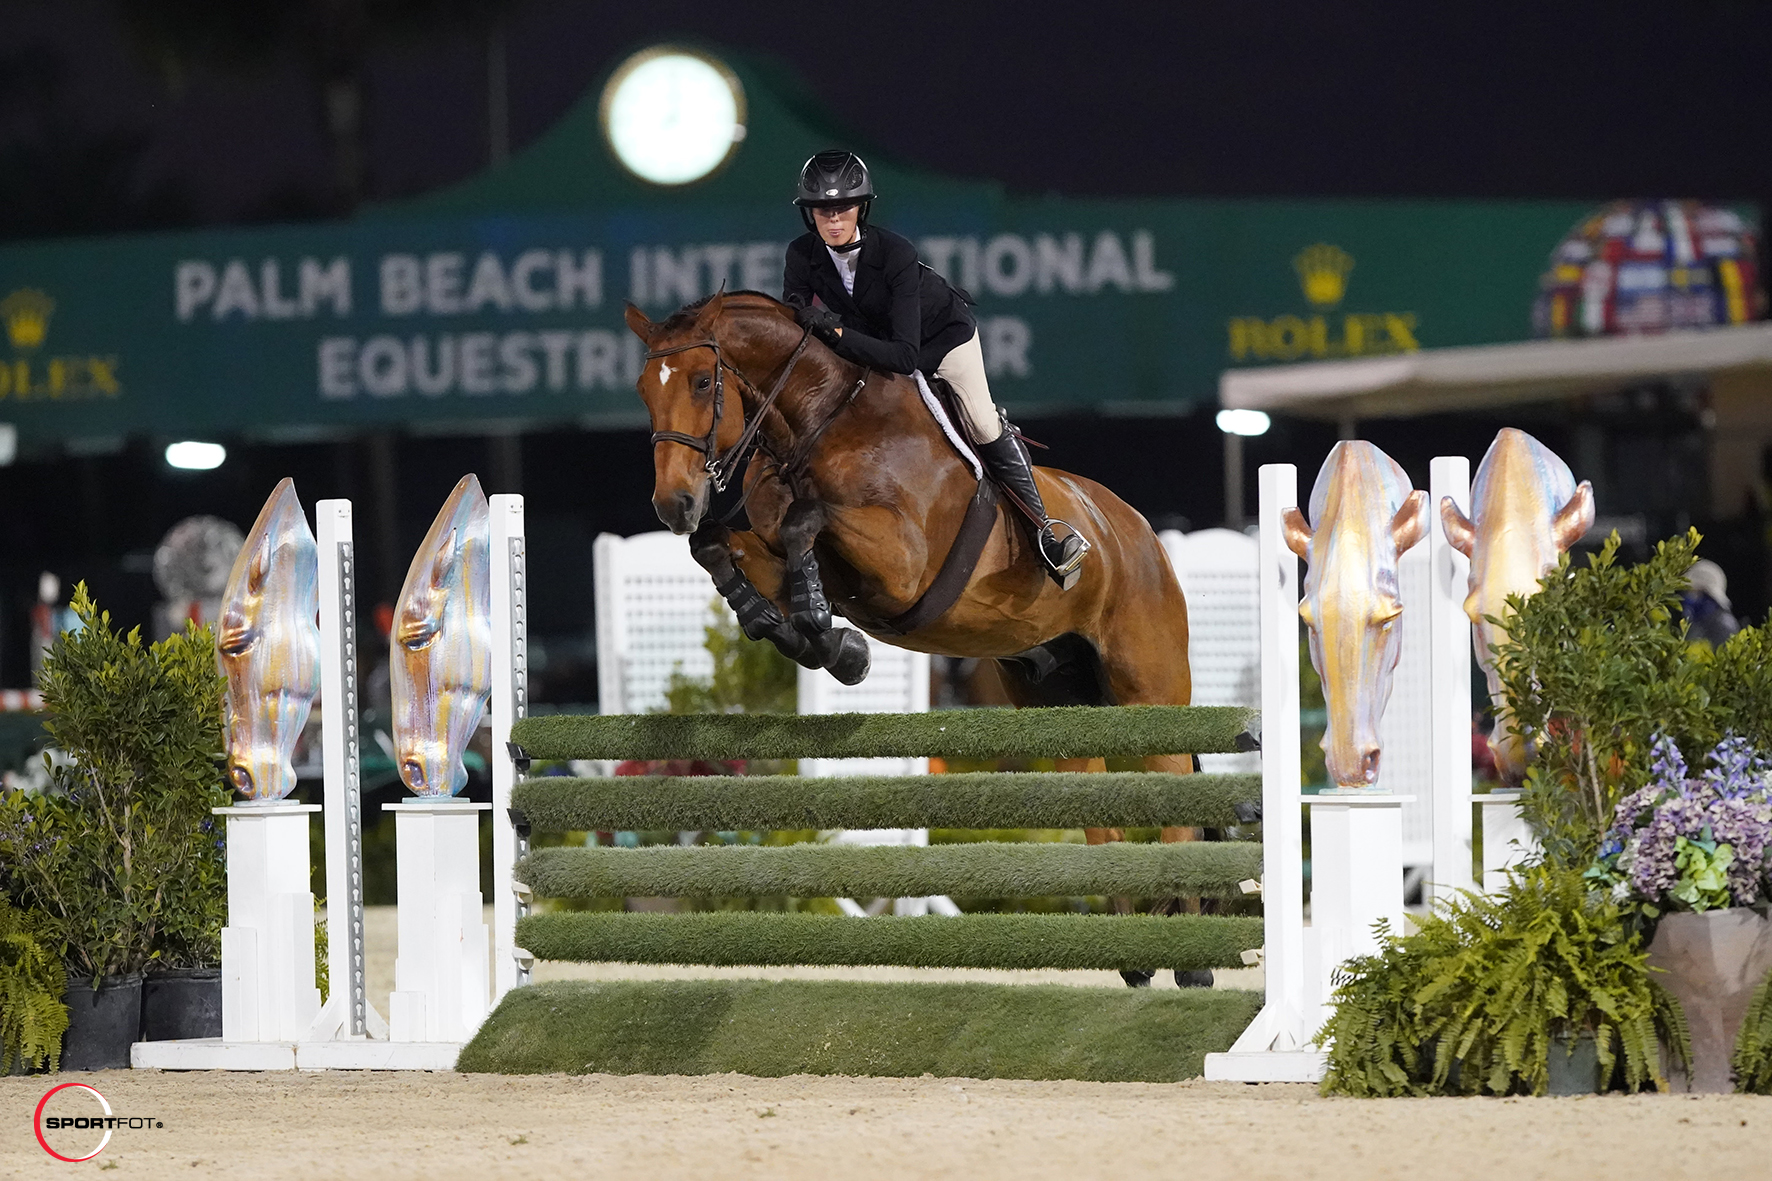 Natalie Jayne and Charisma Shine in the WEF Equitation Championship